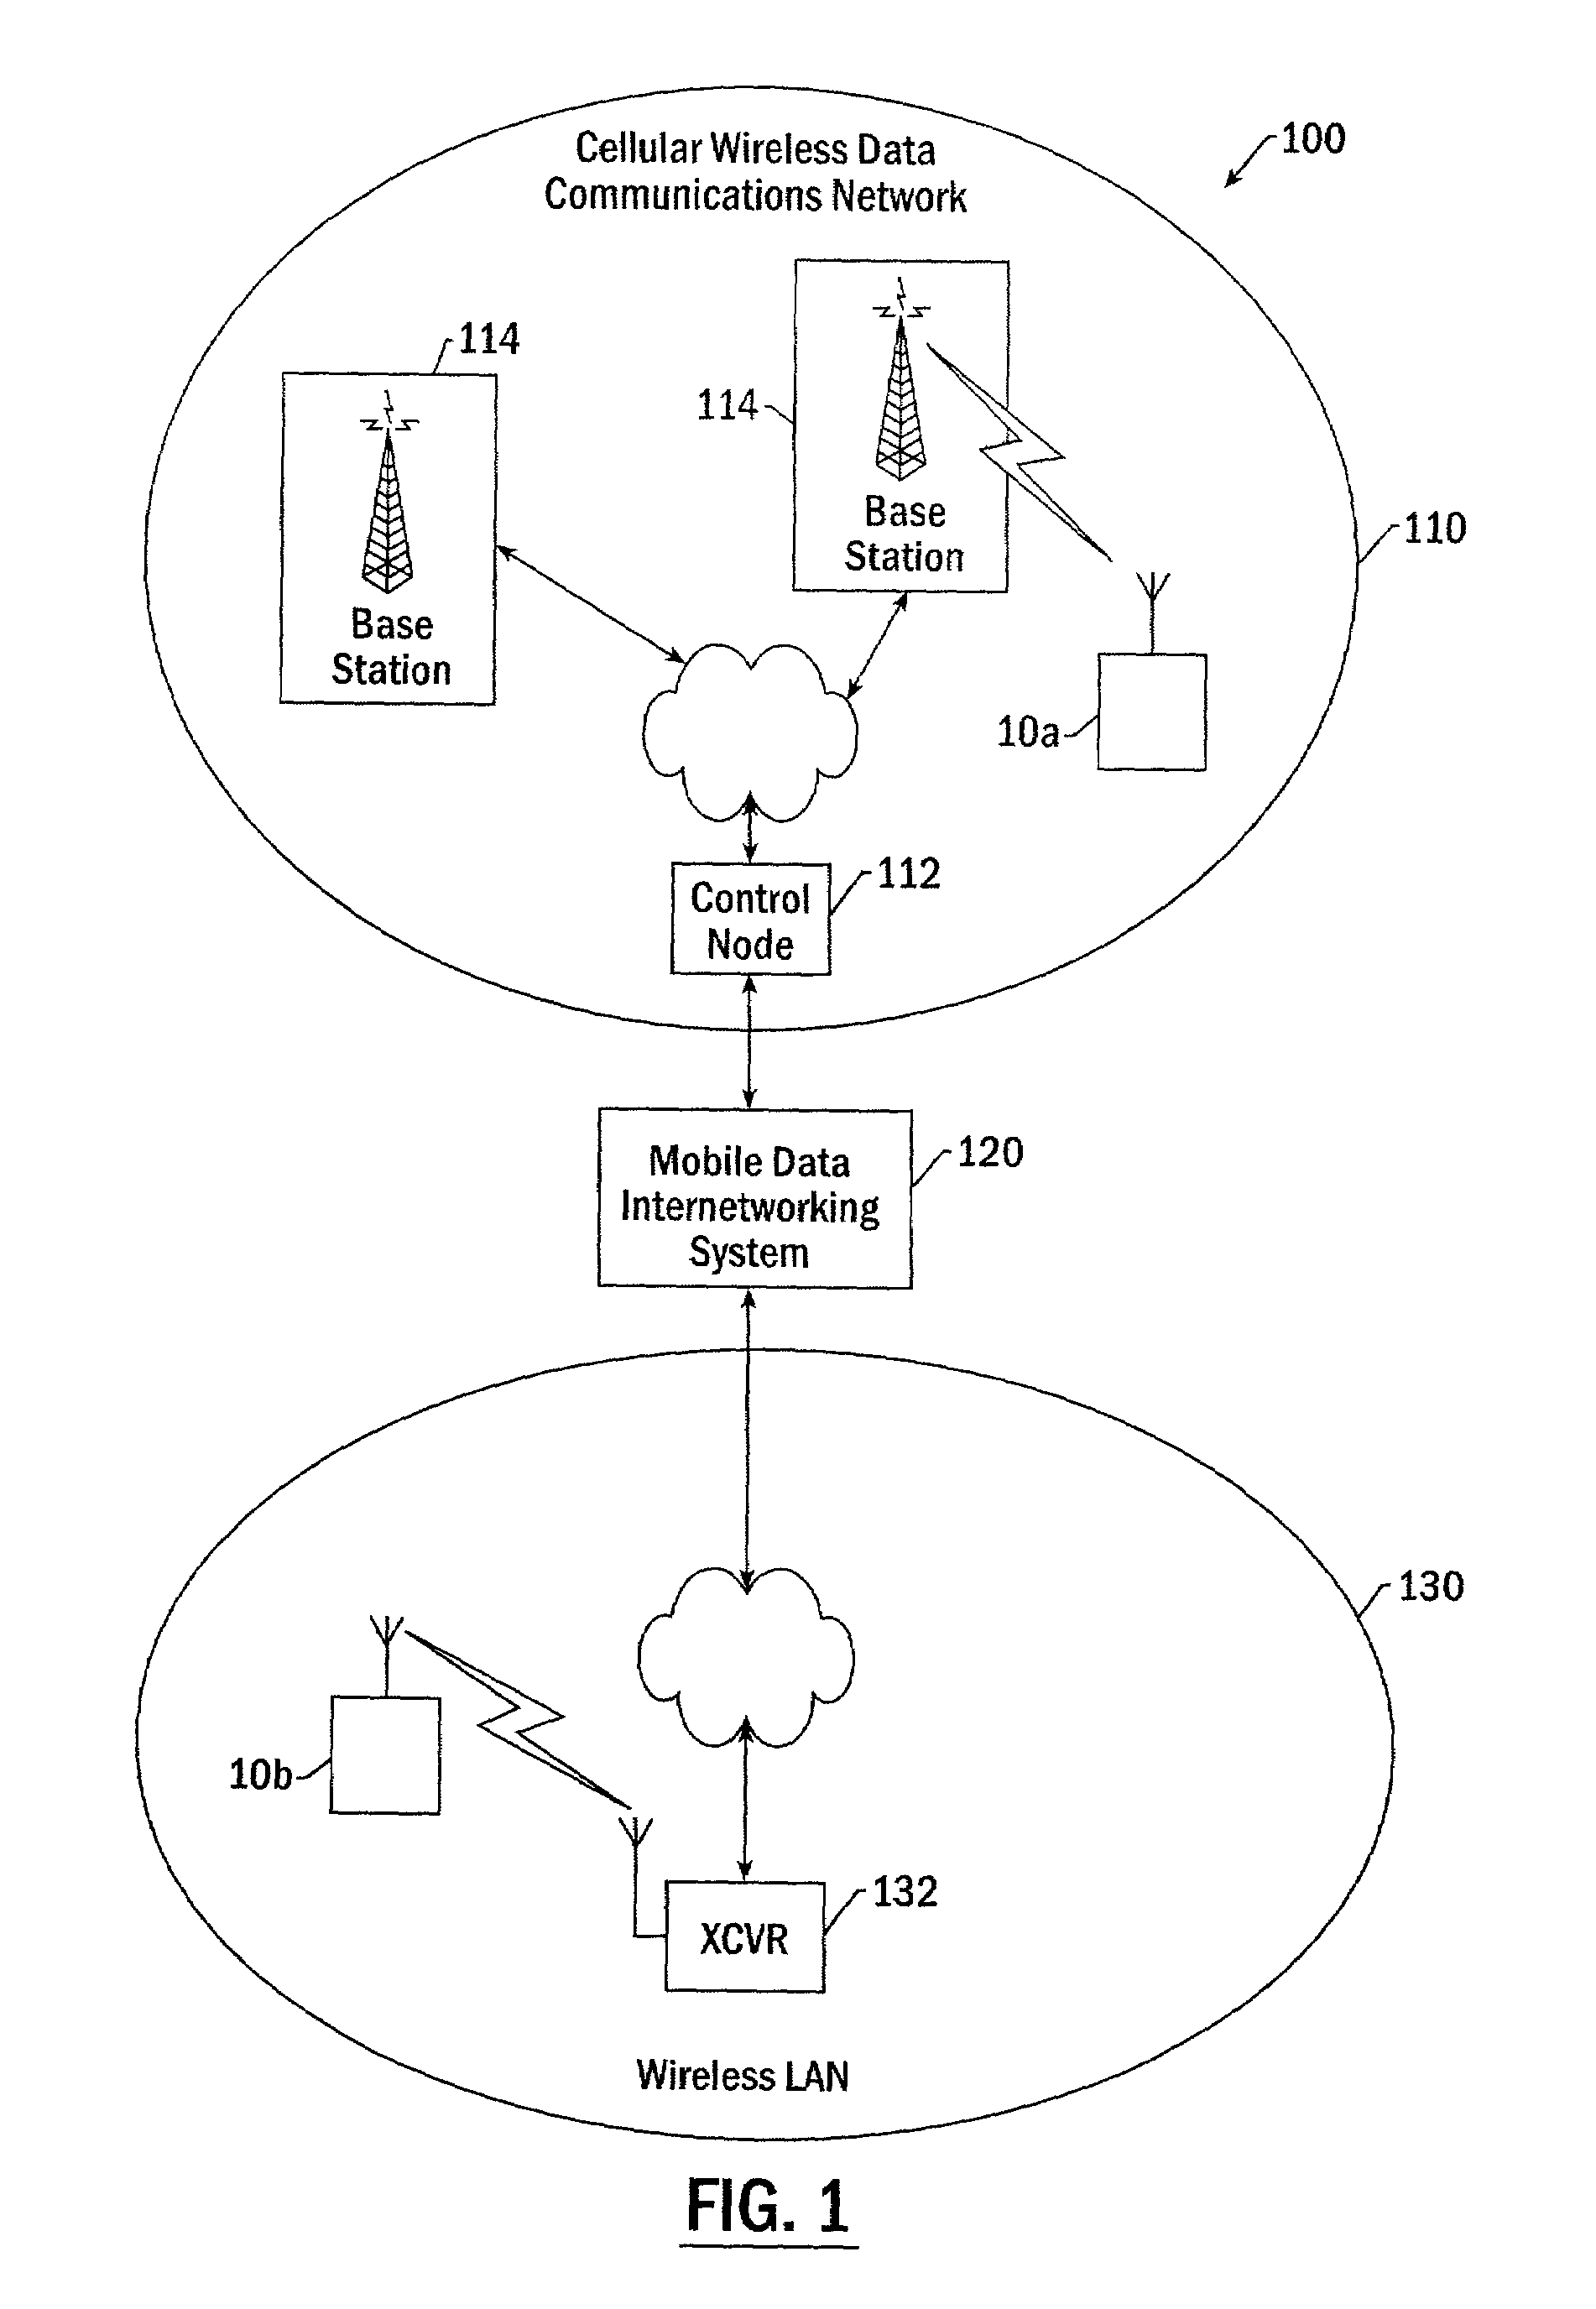 Mobile data communications apparatus, methods and computer program products implementing cellular wireless data communications via a wireless local area network